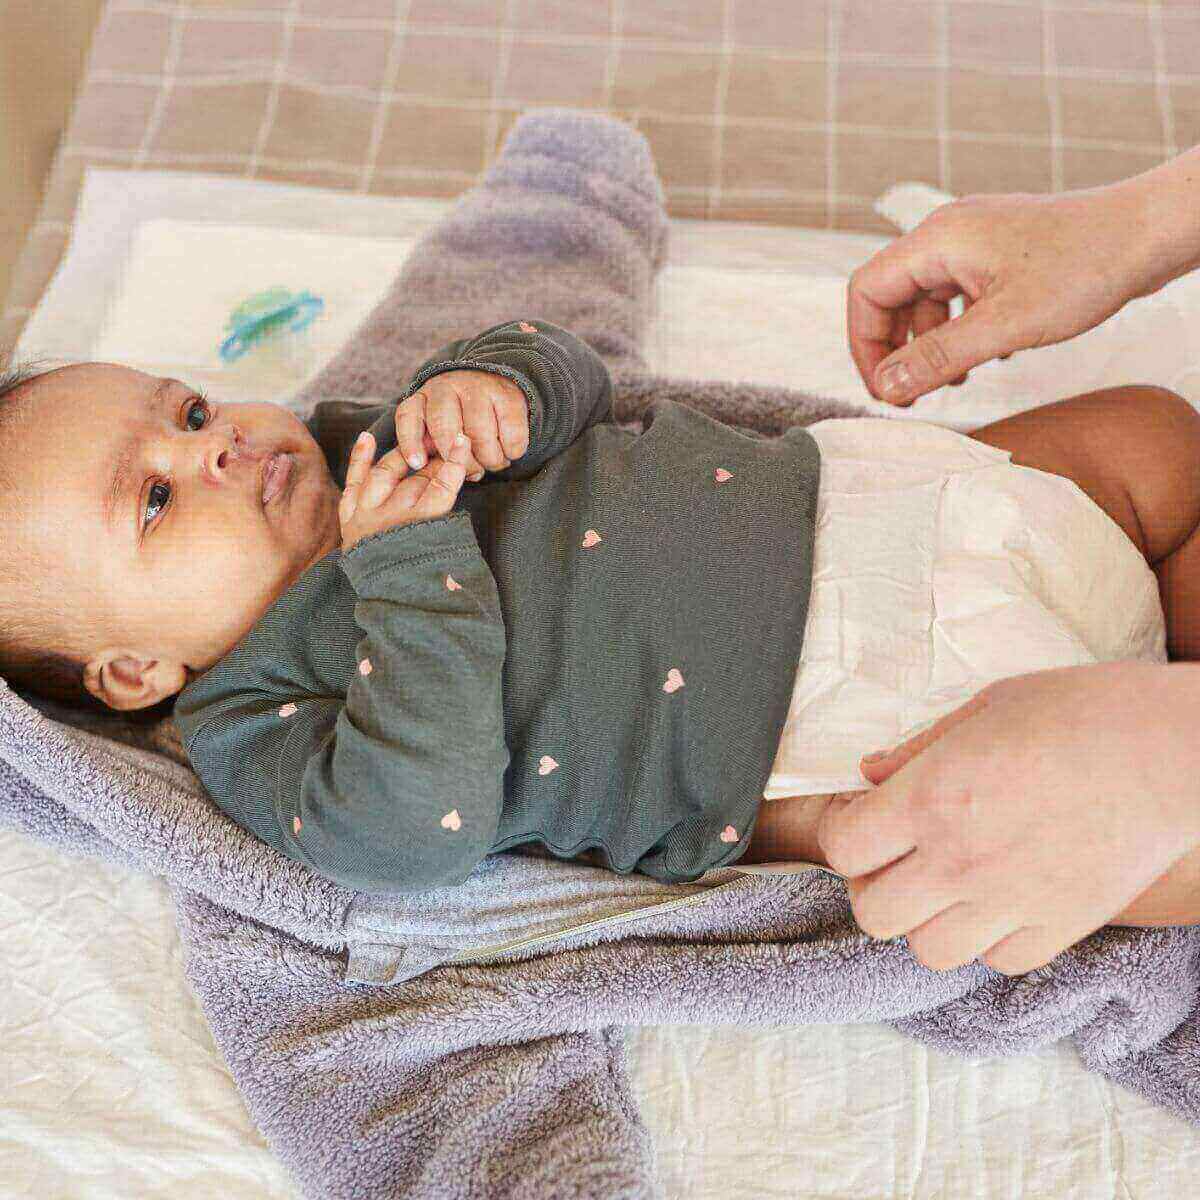 African American baby is laying on a puppy pad after getting their diaper changed. The baby is wearing a dark grey shirt with little light pink hearts all over it